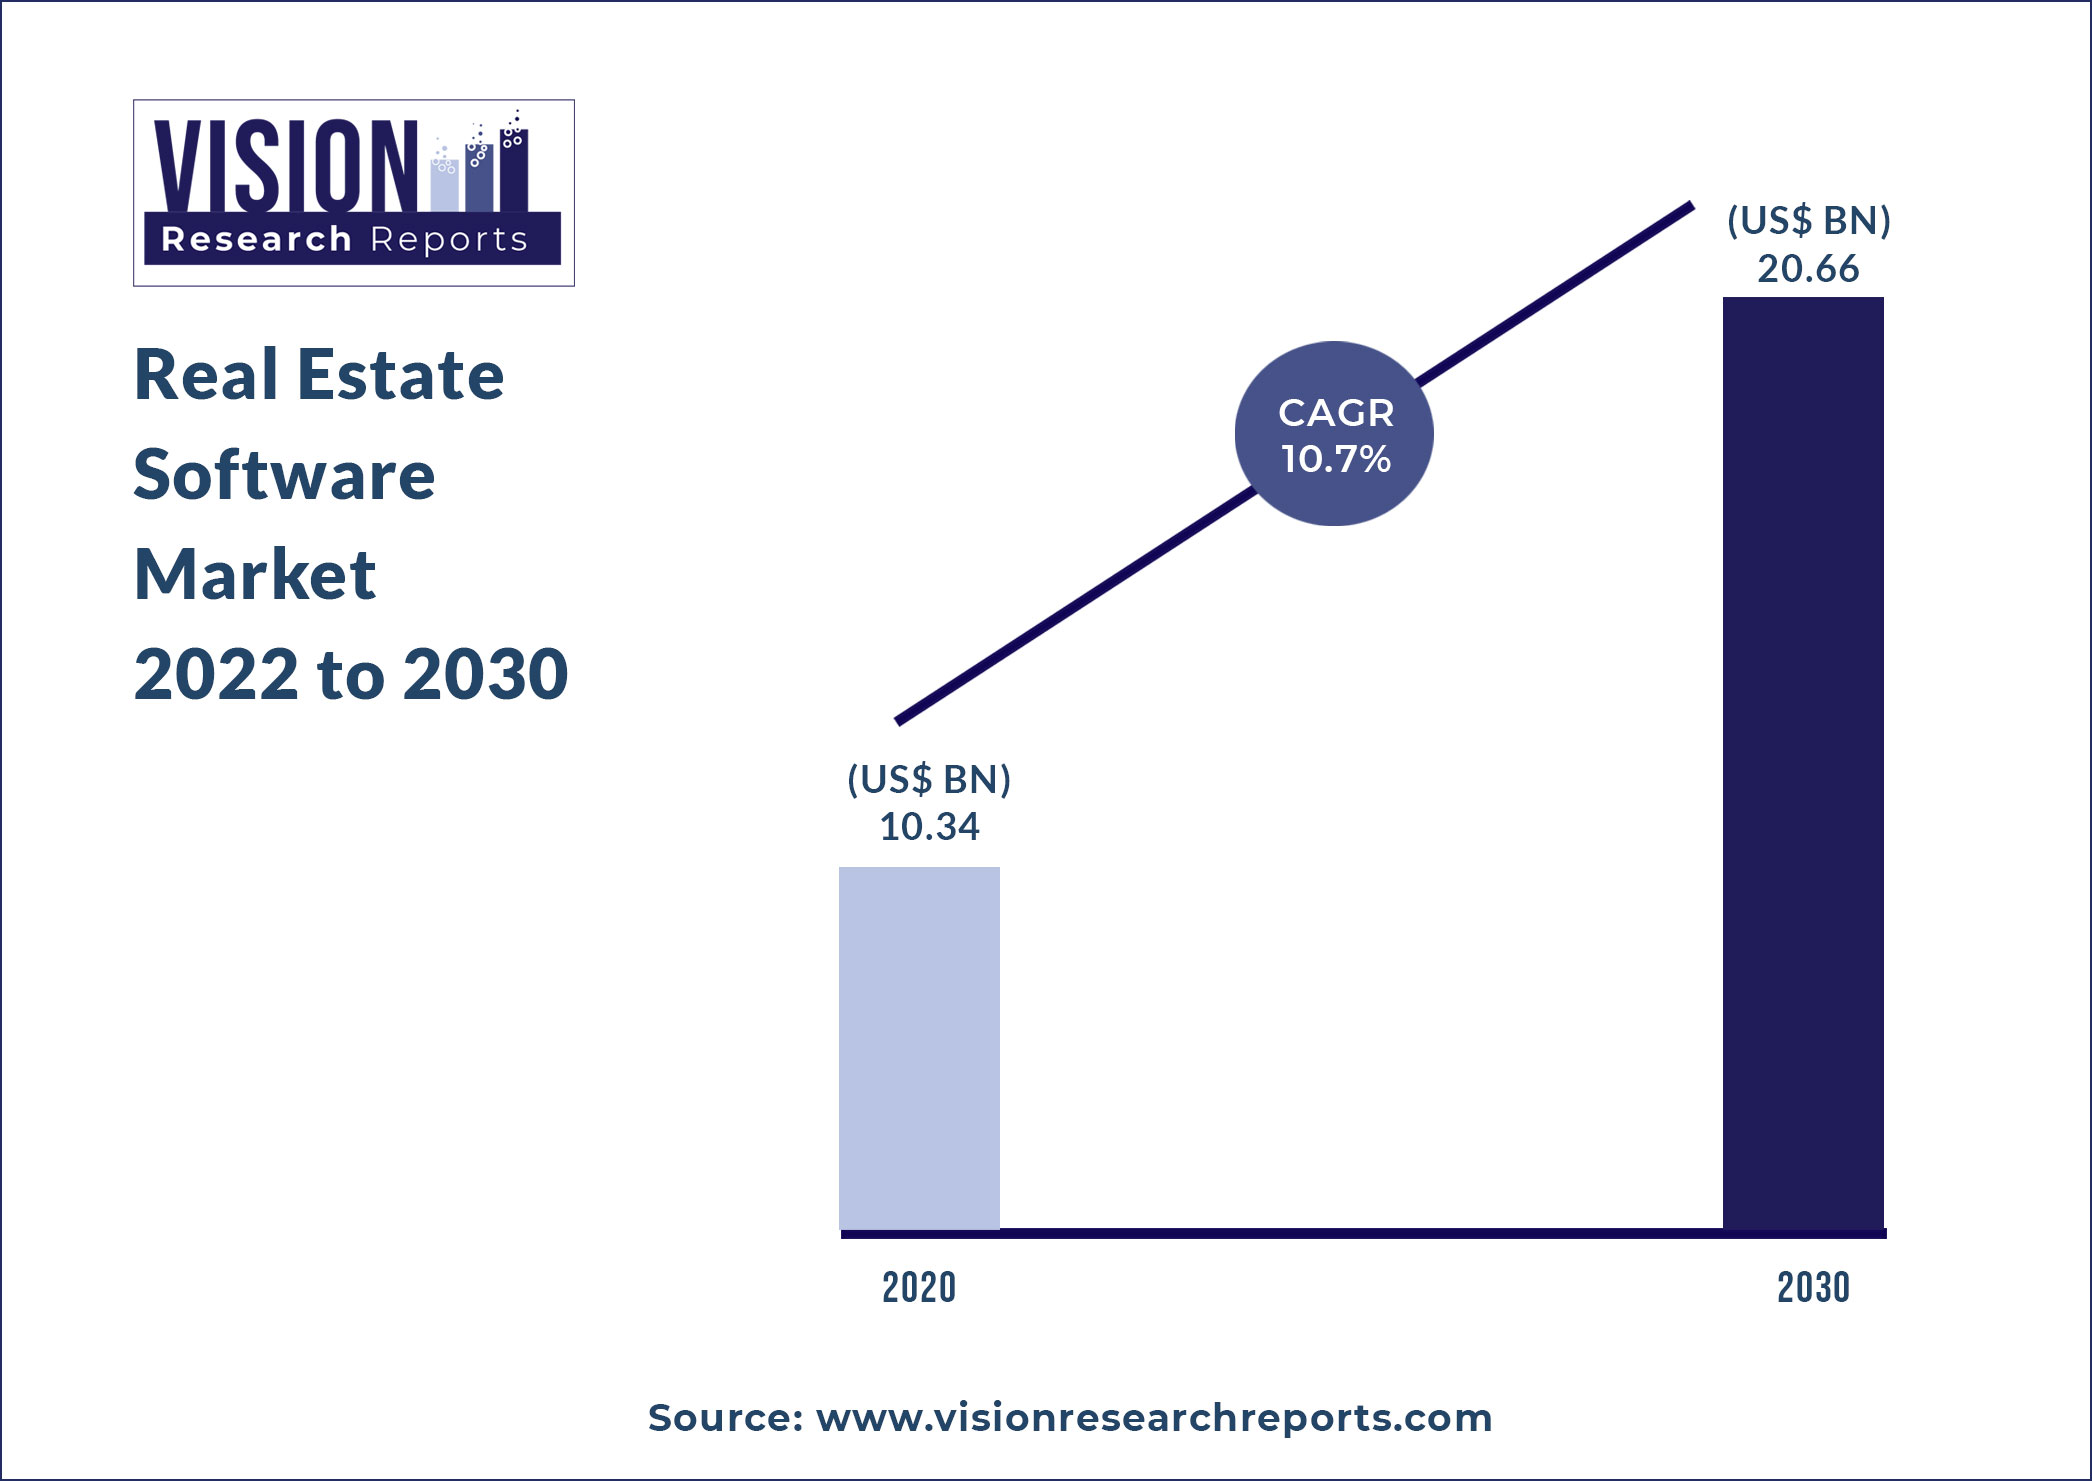 Real Estate Software Market Size 2022 to 2030